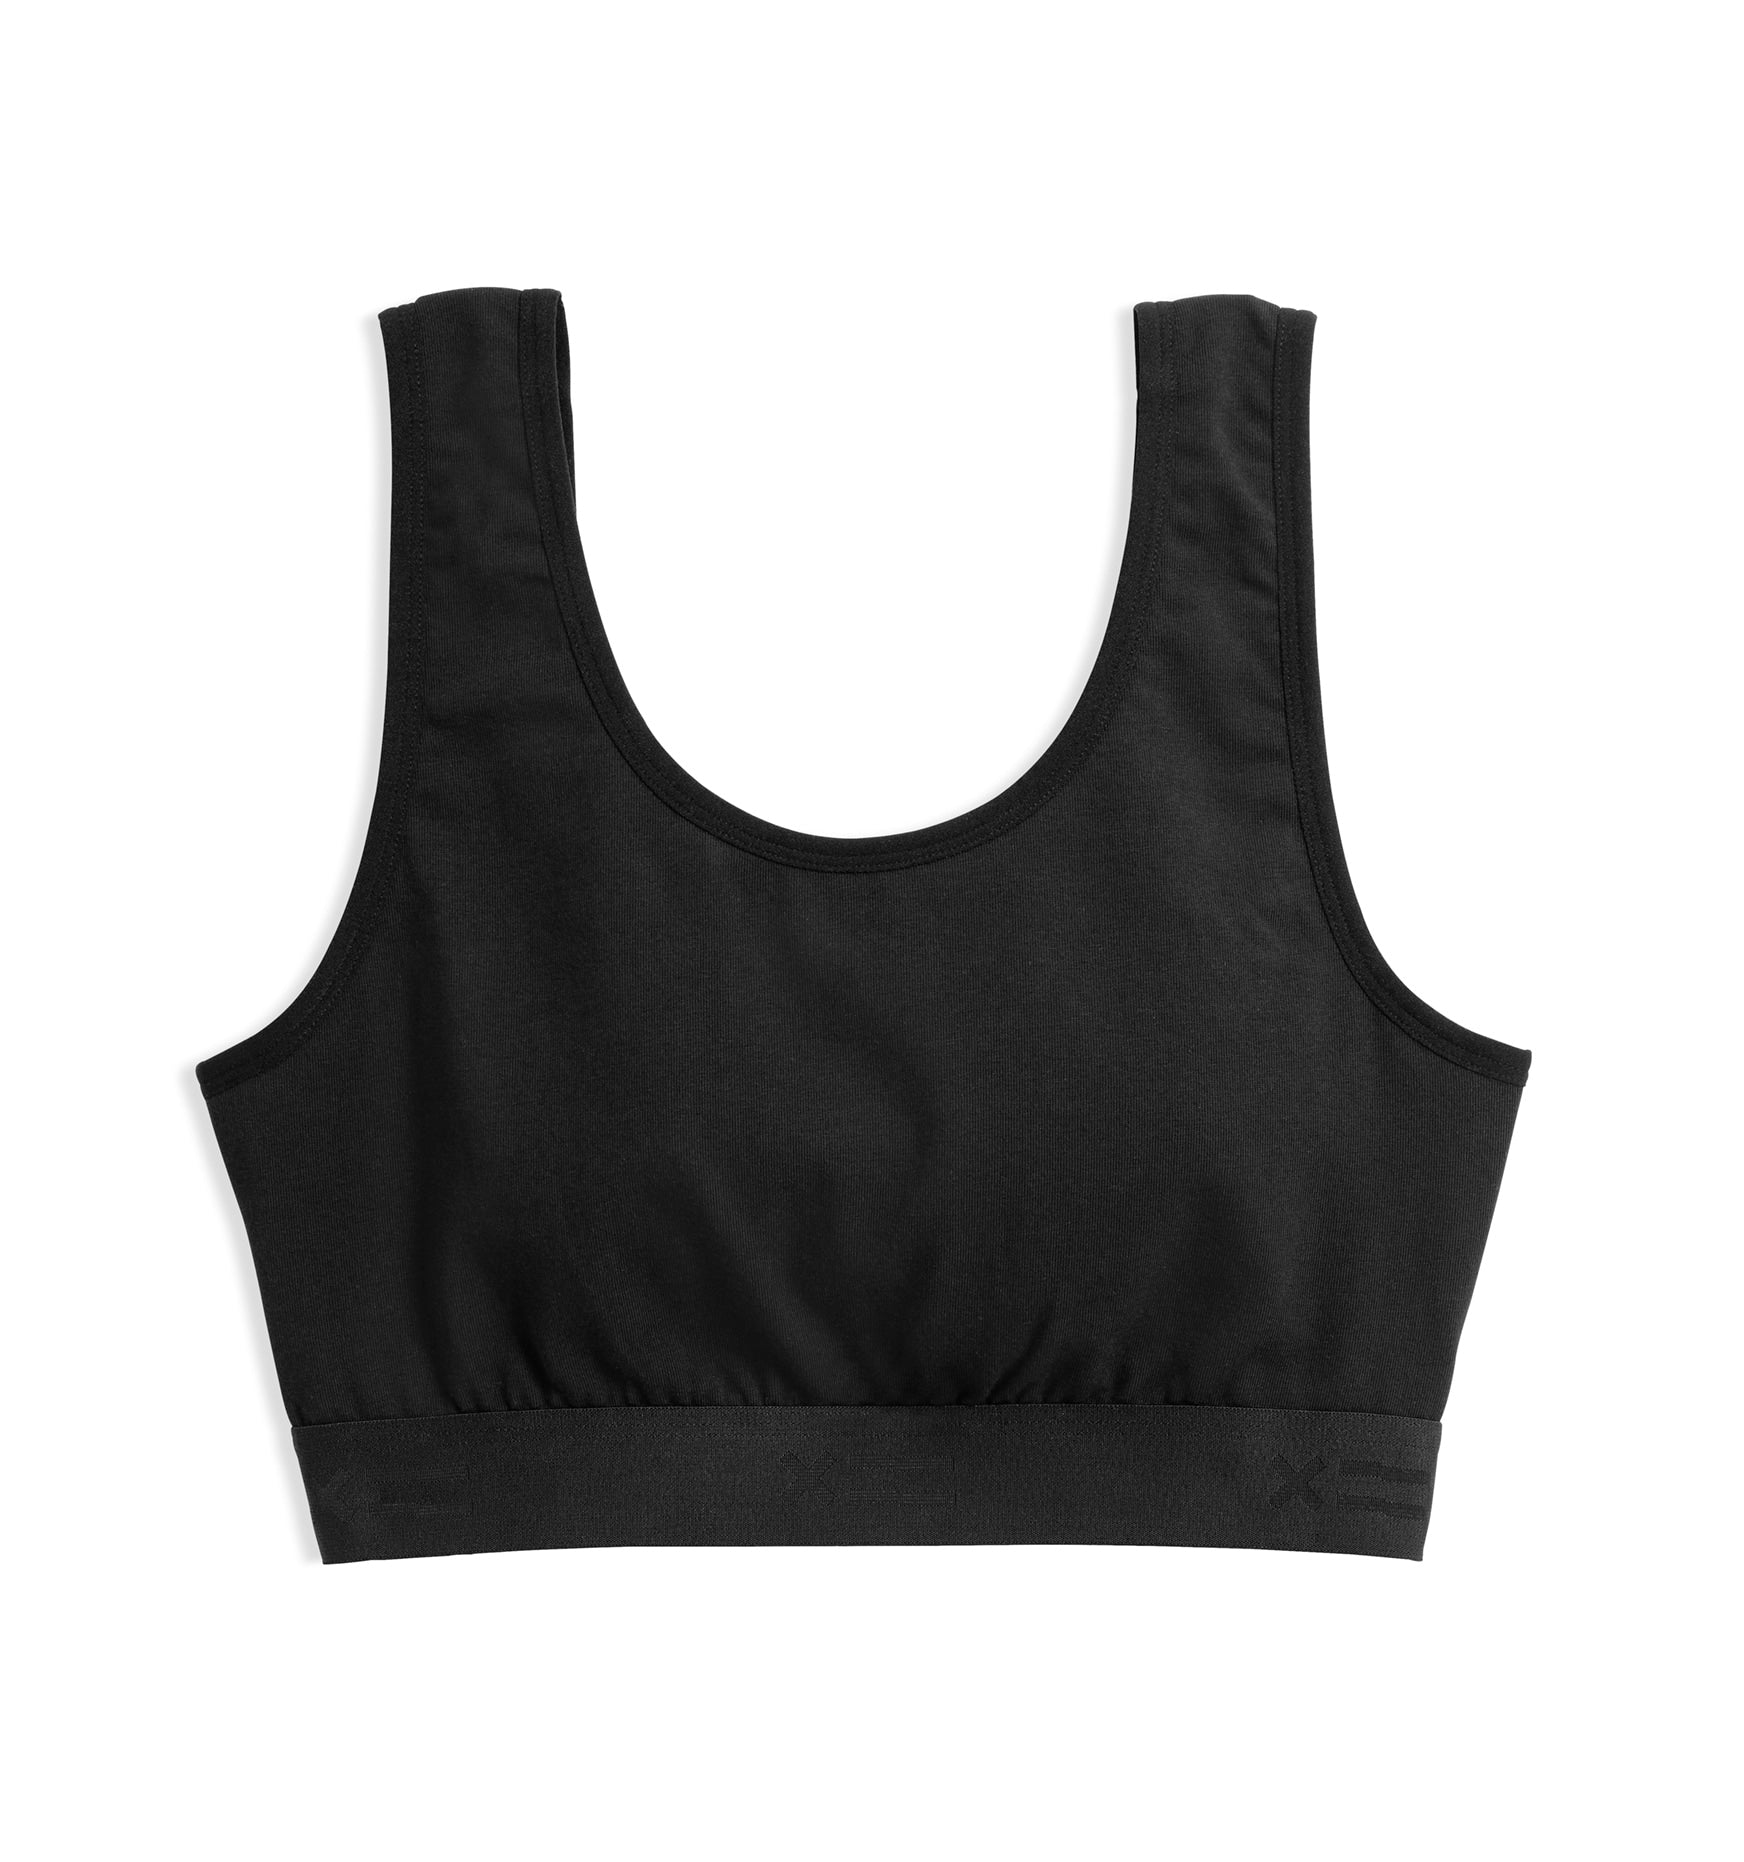 TomboyX Sports Bra, Low Impact Support, Wirefree Athletic Strappy Back Top,  Womens Plus-Size Inclusive Bras, (XS-6X) Black 6X Large